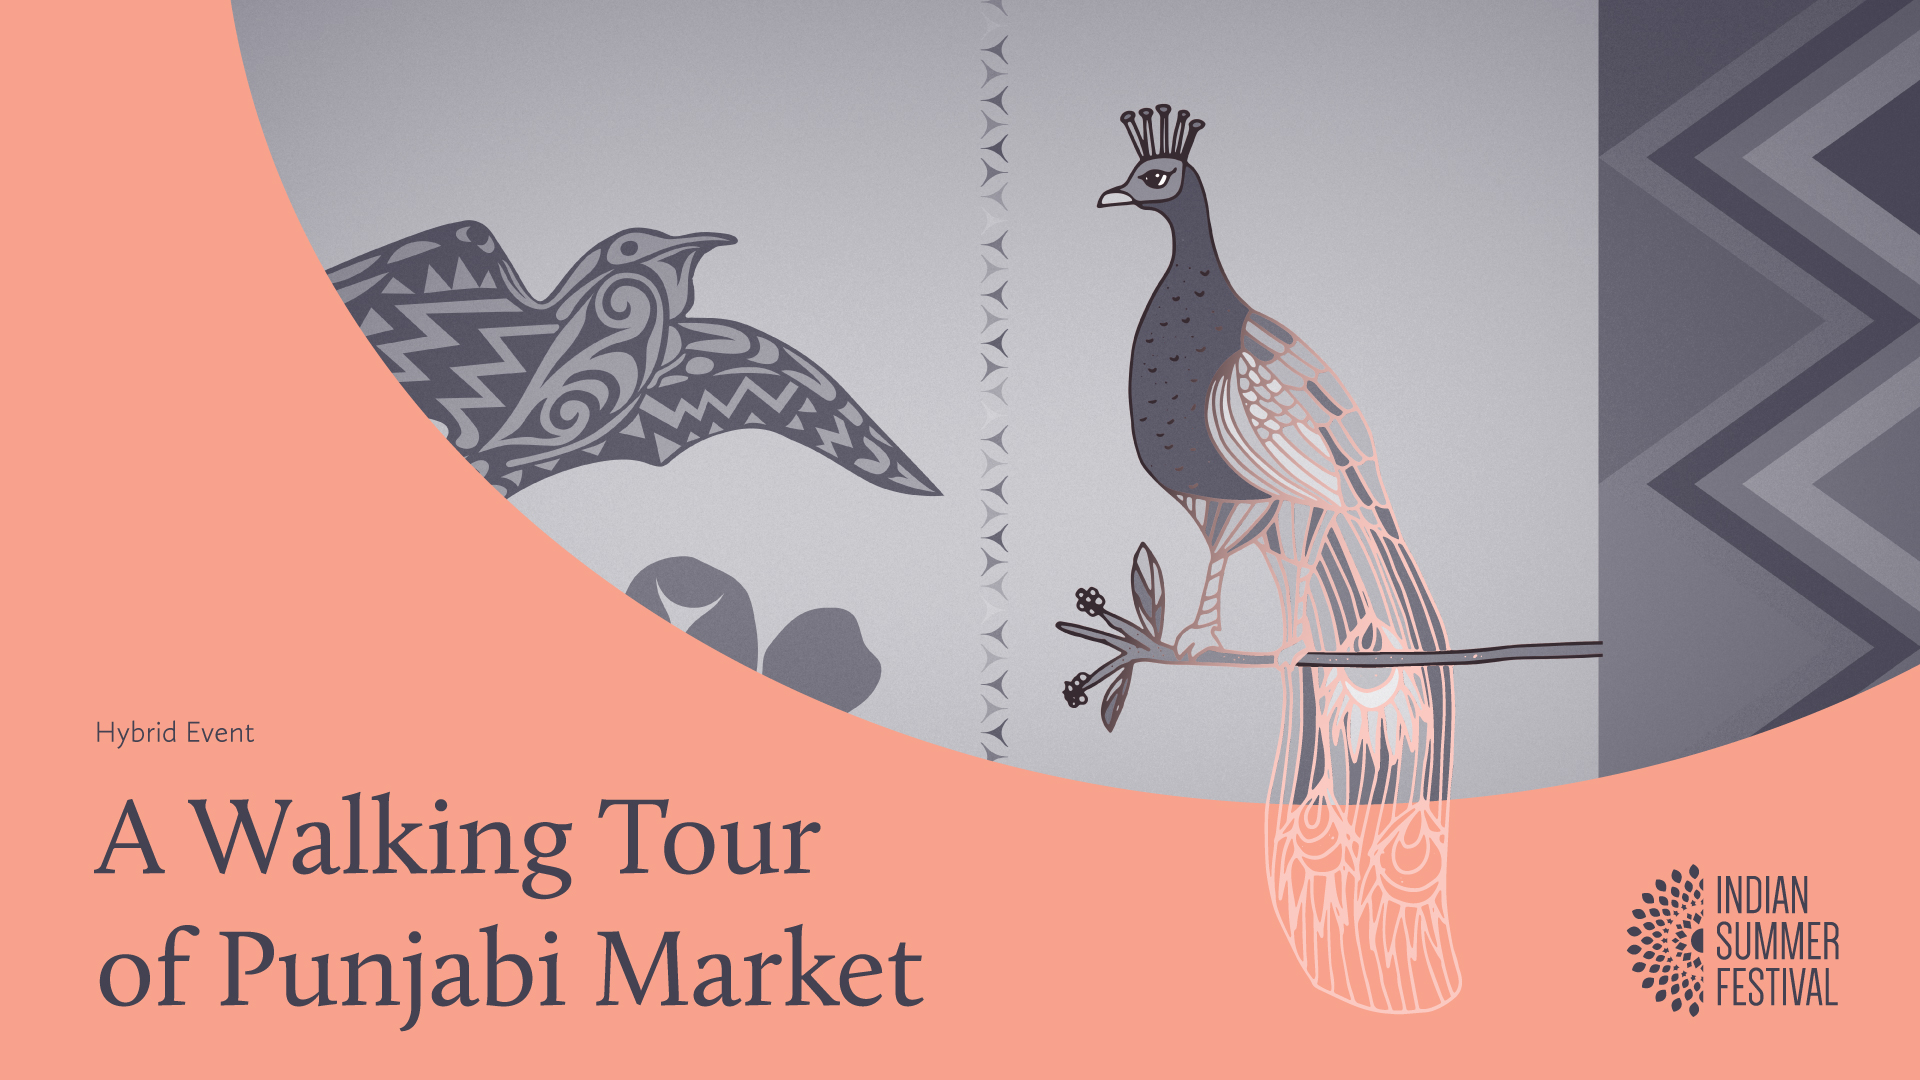 Hybrid Event logo, text reads: A Walking Tour of Punjabi Market. A cool gray drawing of a perched peacock, some patterns, and a bird takes up a portion of the image.